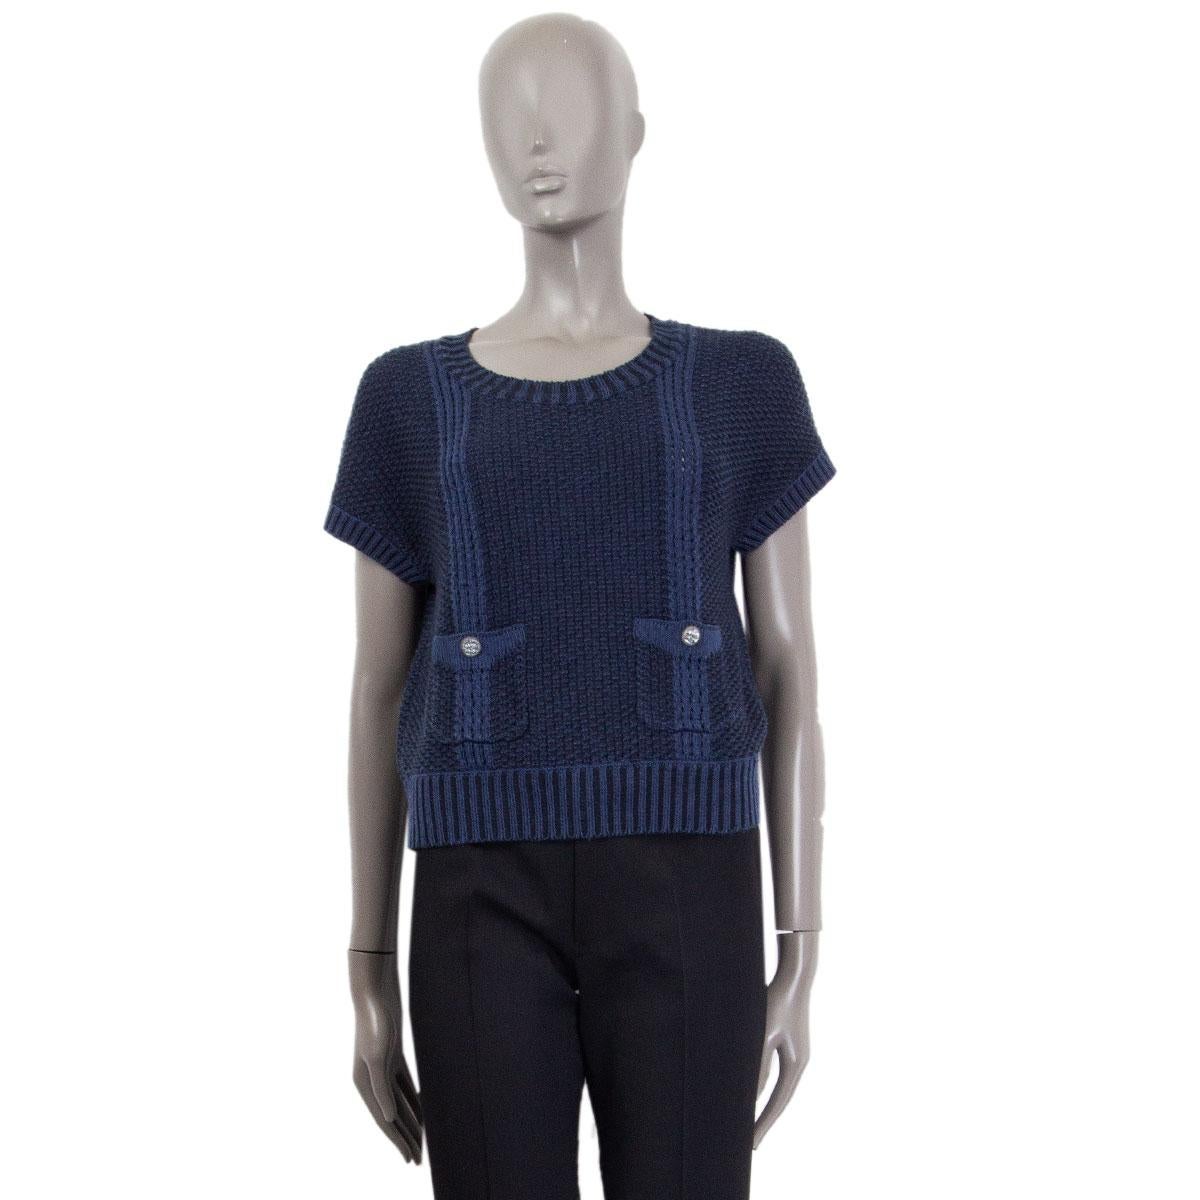 100% authentic Chanel cruise 2017 short sleeve knitted sweater in midnight blue wool (72%) and paper (28%) with round, ribbed neck-line, ribbed sleeves hem and bottom-hem. Featuring two pockets on the front with logo-button. Unlined. Has been worn